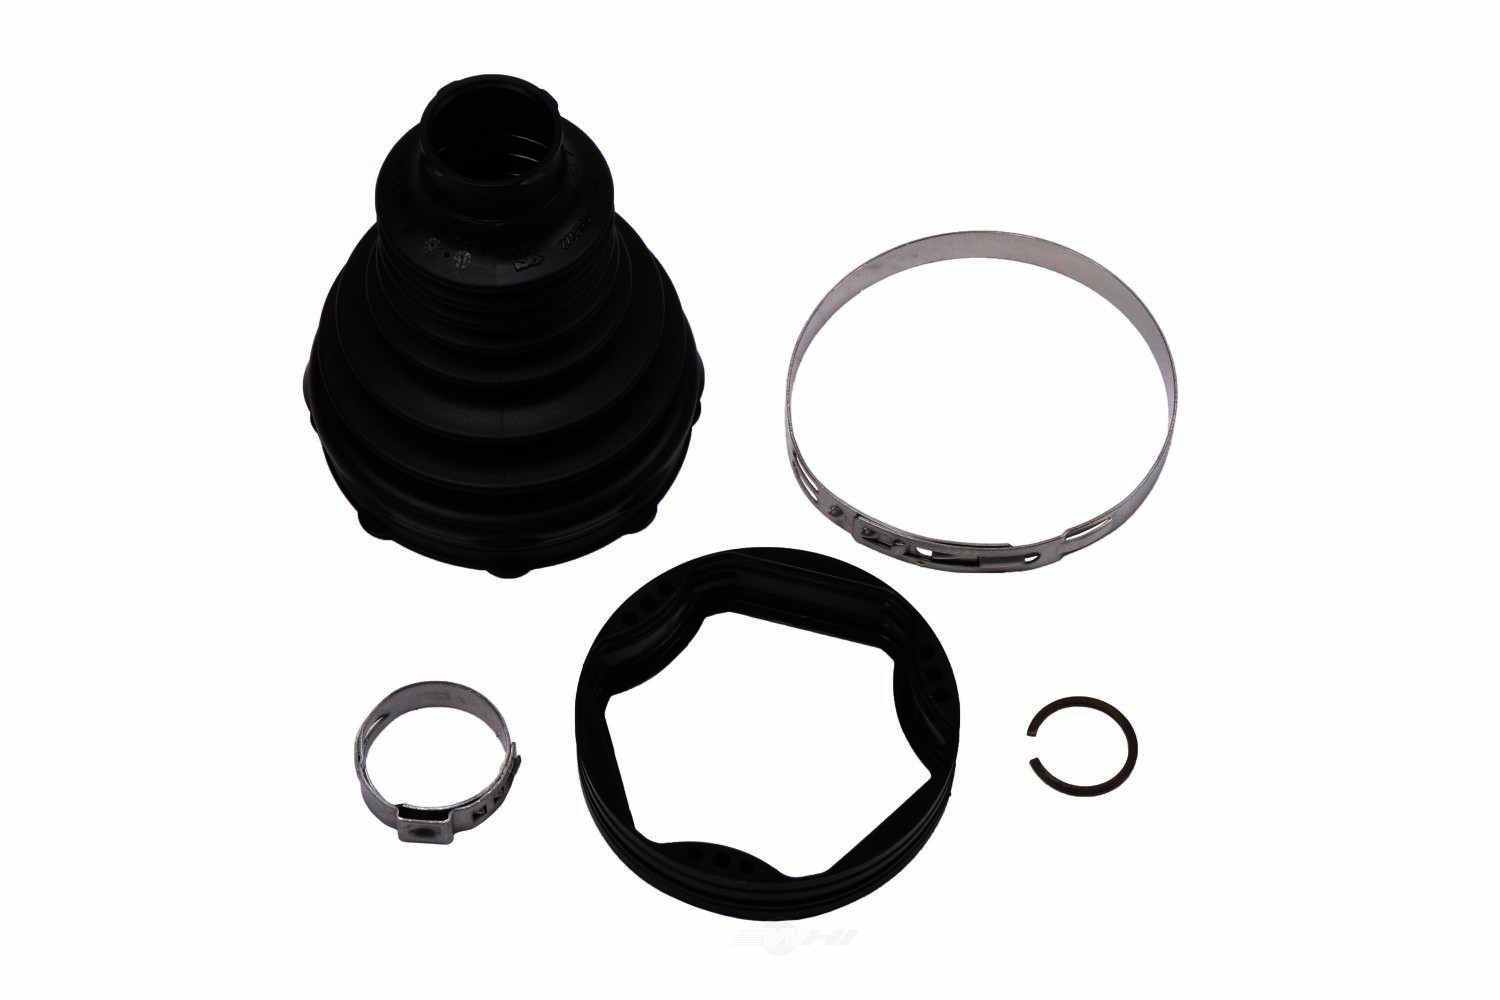 GM GENUINE PARTS - CV Joint Boot Kit - GMP 84227475